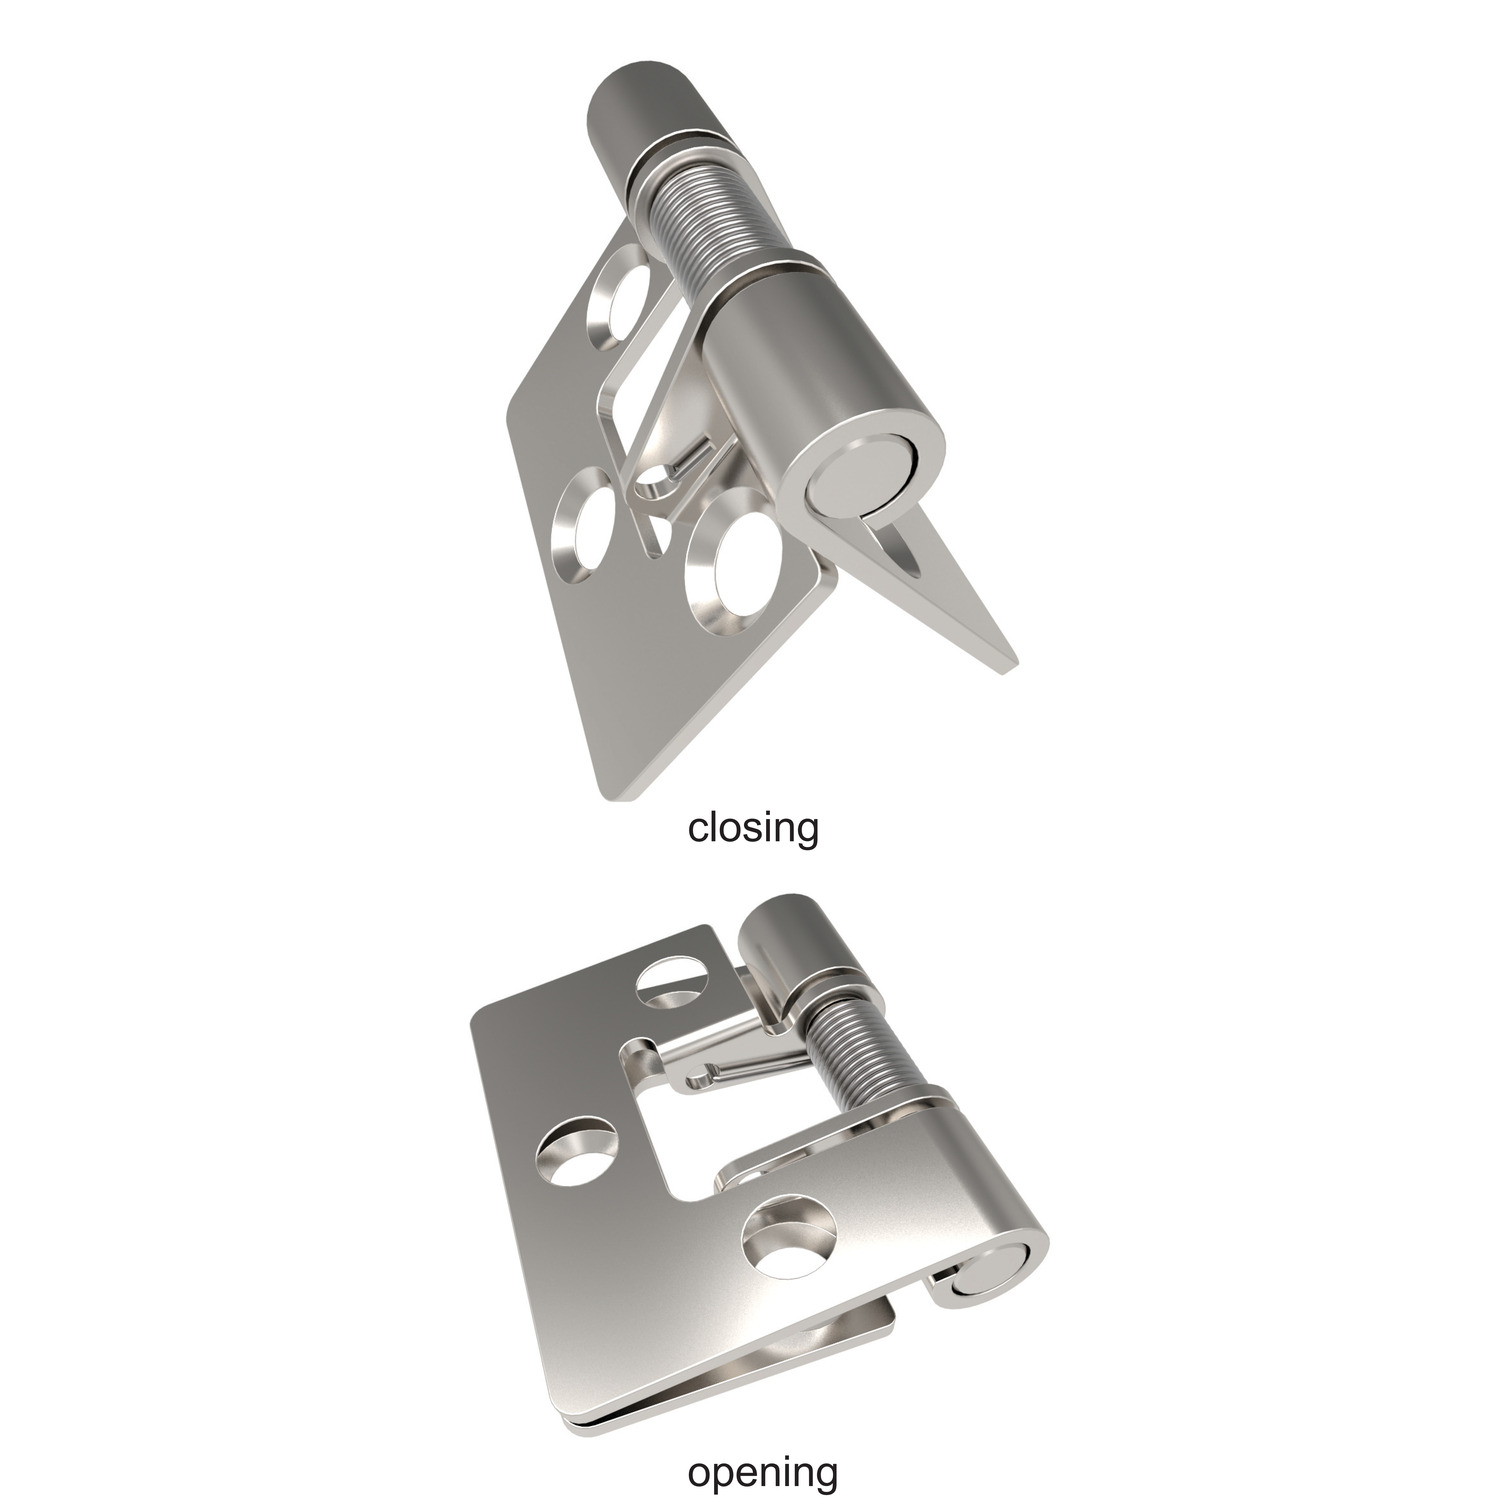 S4200 Spring Hinges - High Tension